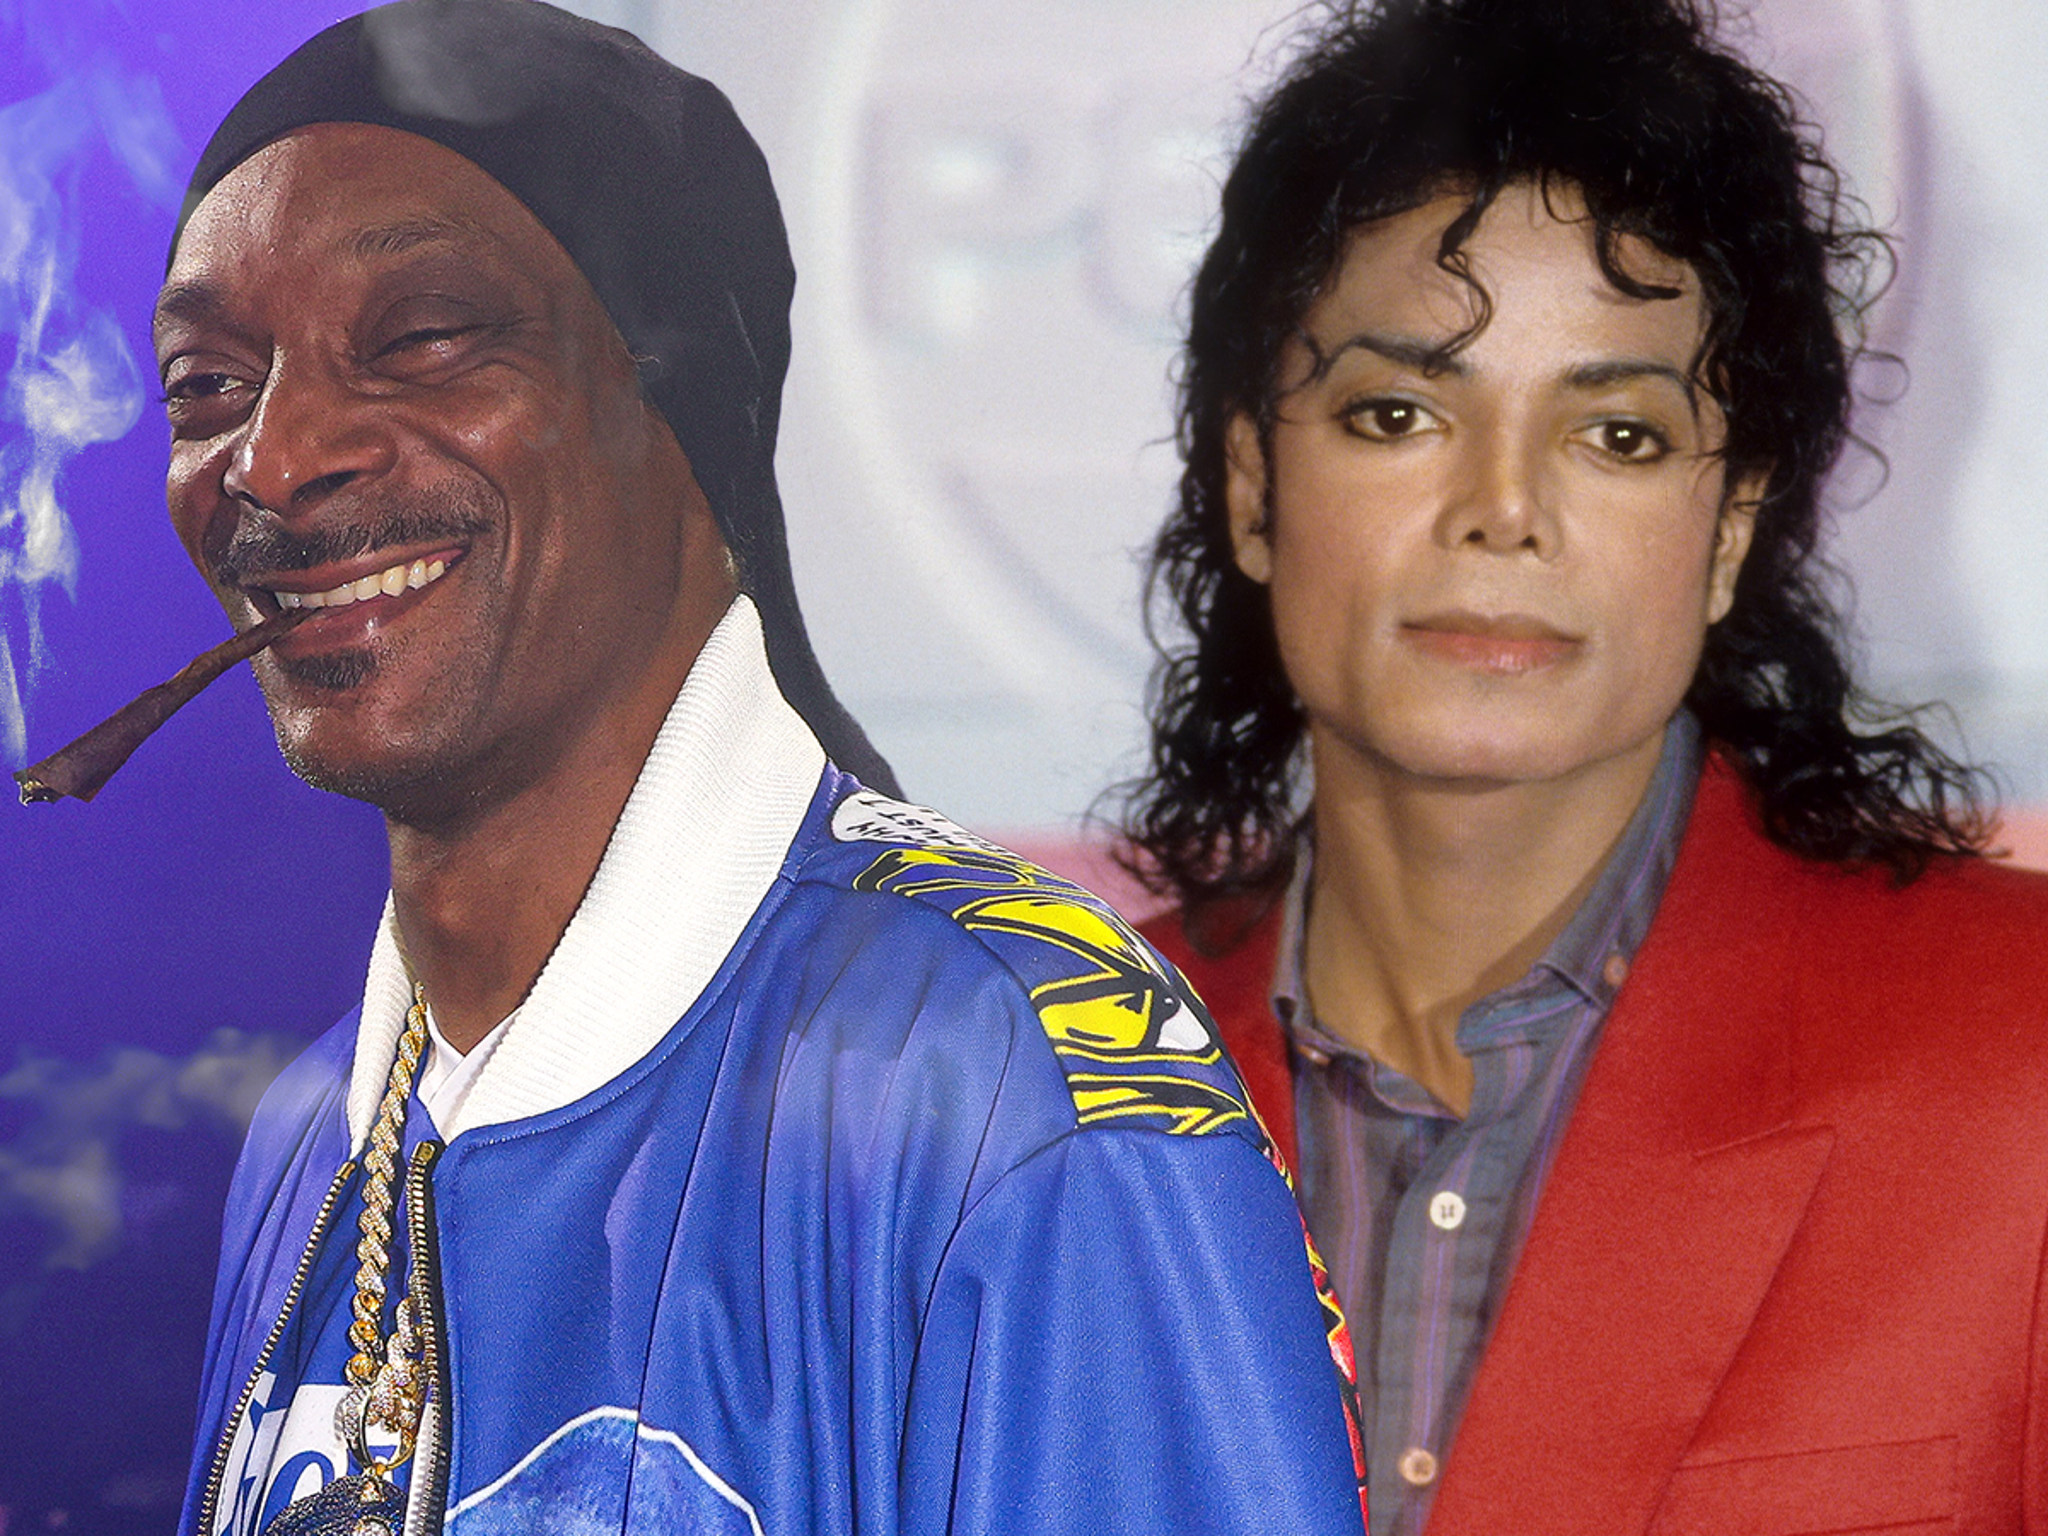 Snoop Dogg Once Upset Michael Jackson After Blowing Weed Smoke At Him